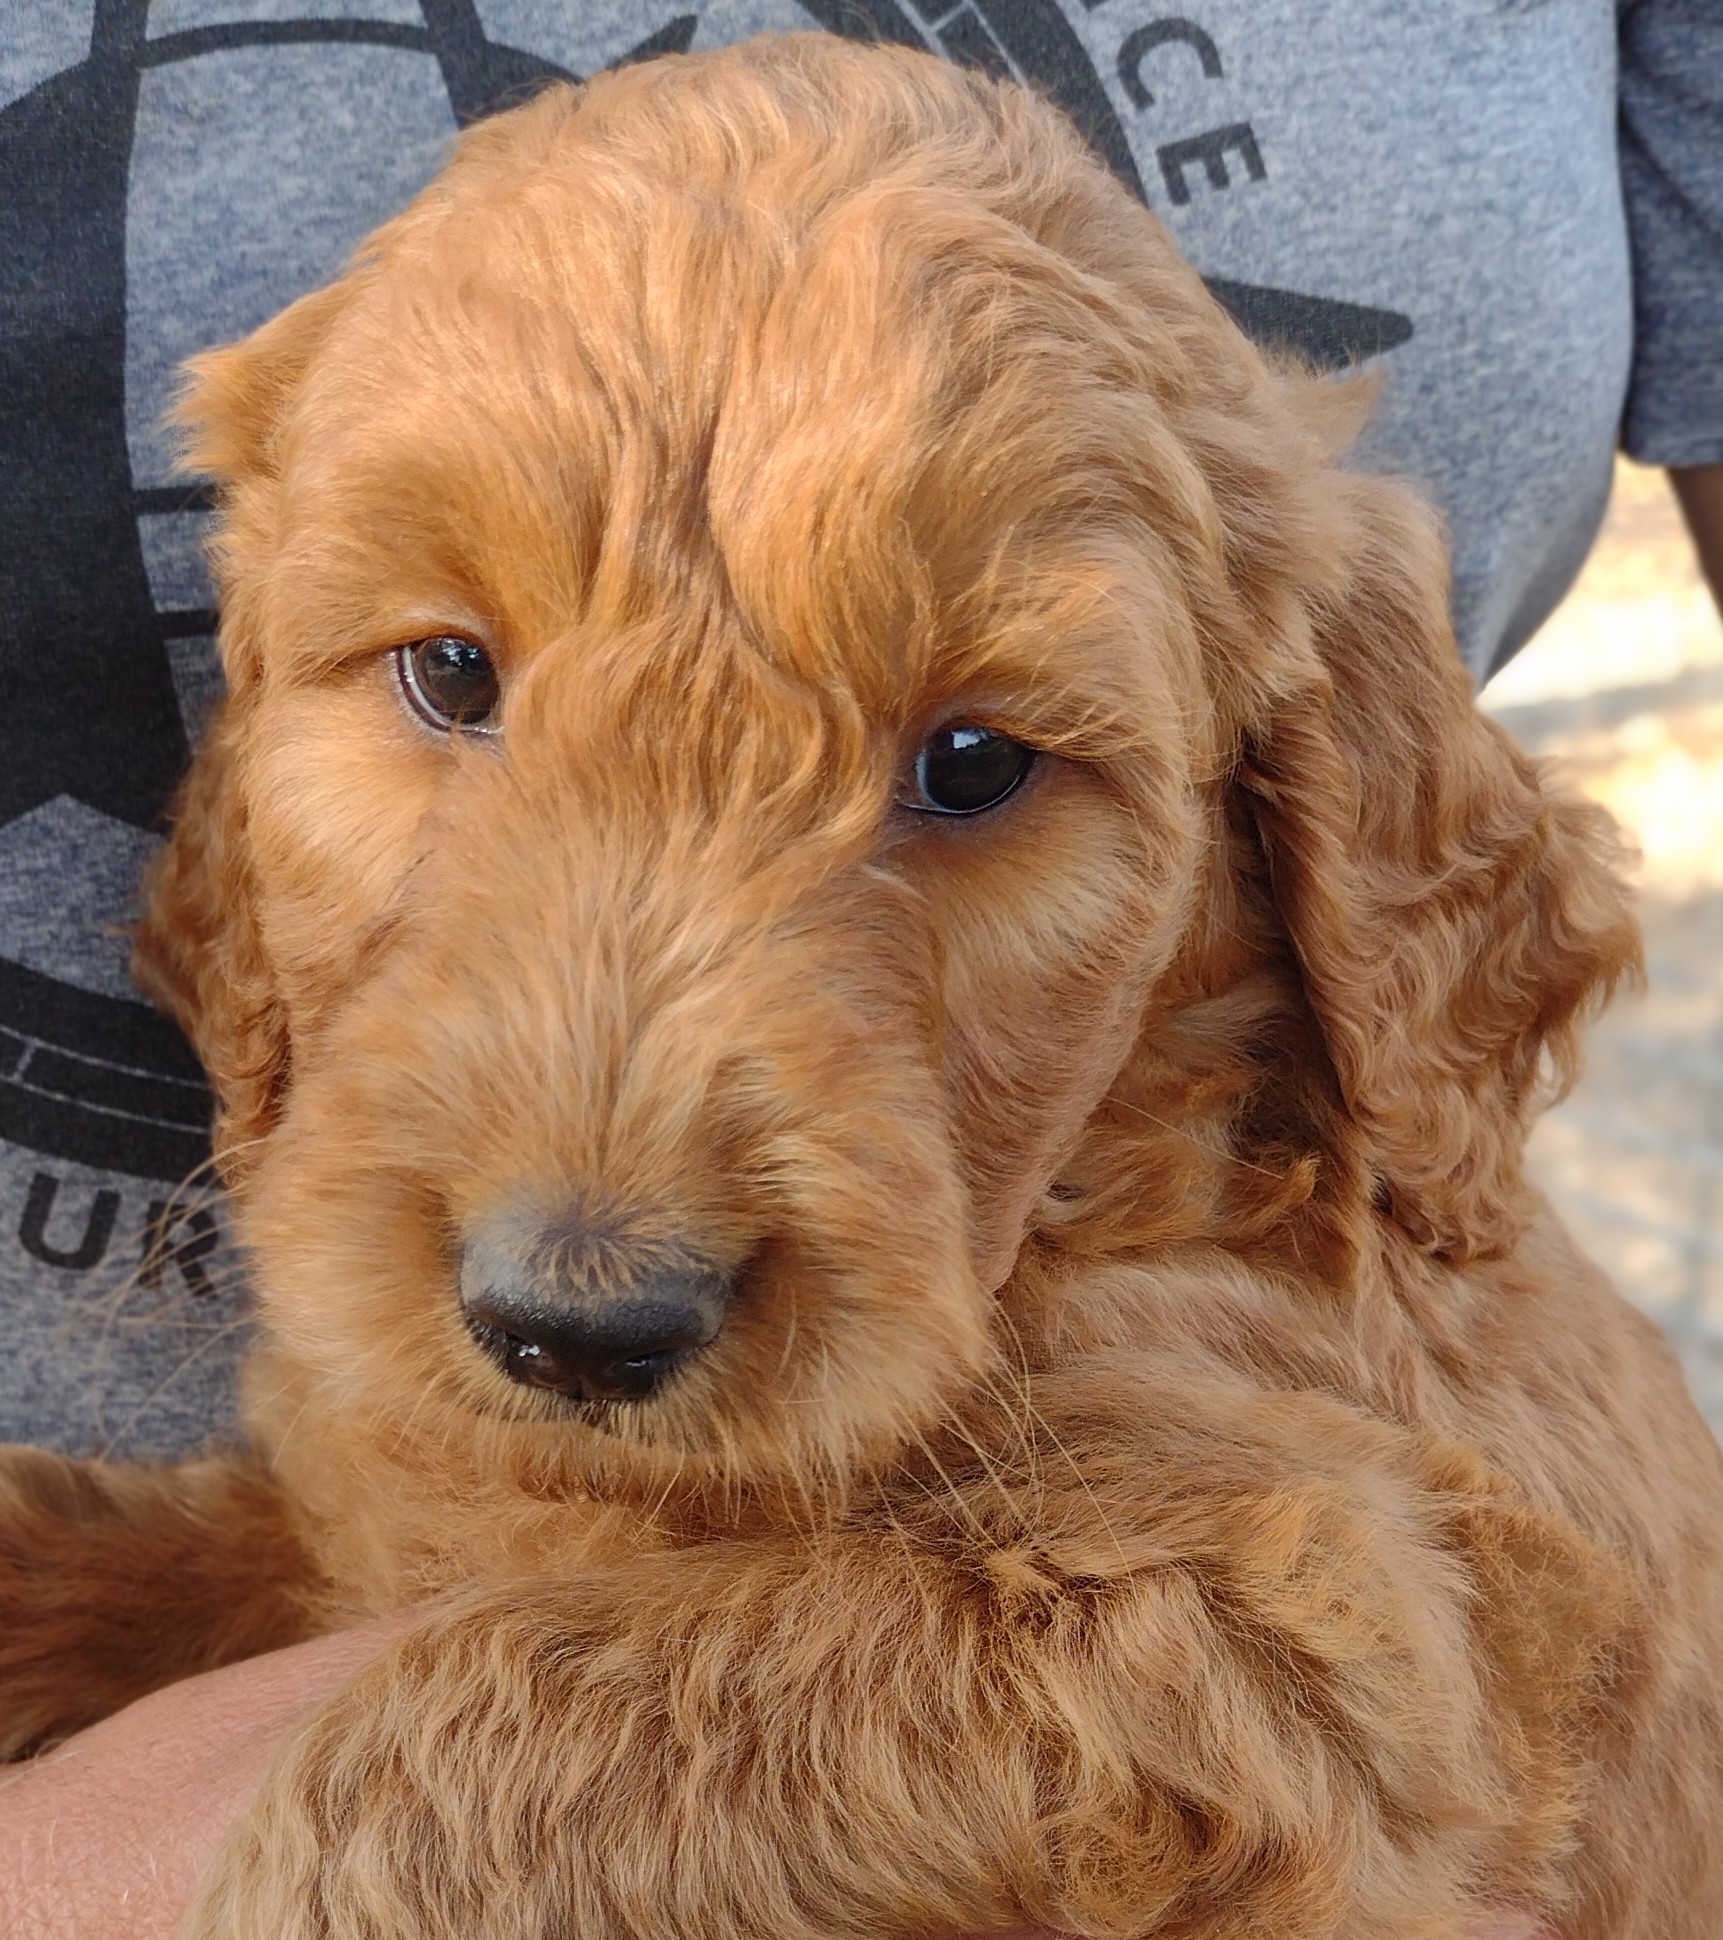 Meet Maya, A Lovely Red Goldendoodle Puppy From Red Cedar Farms In Hutchinson, MN.  Come And Meet Your New Friend Today!!